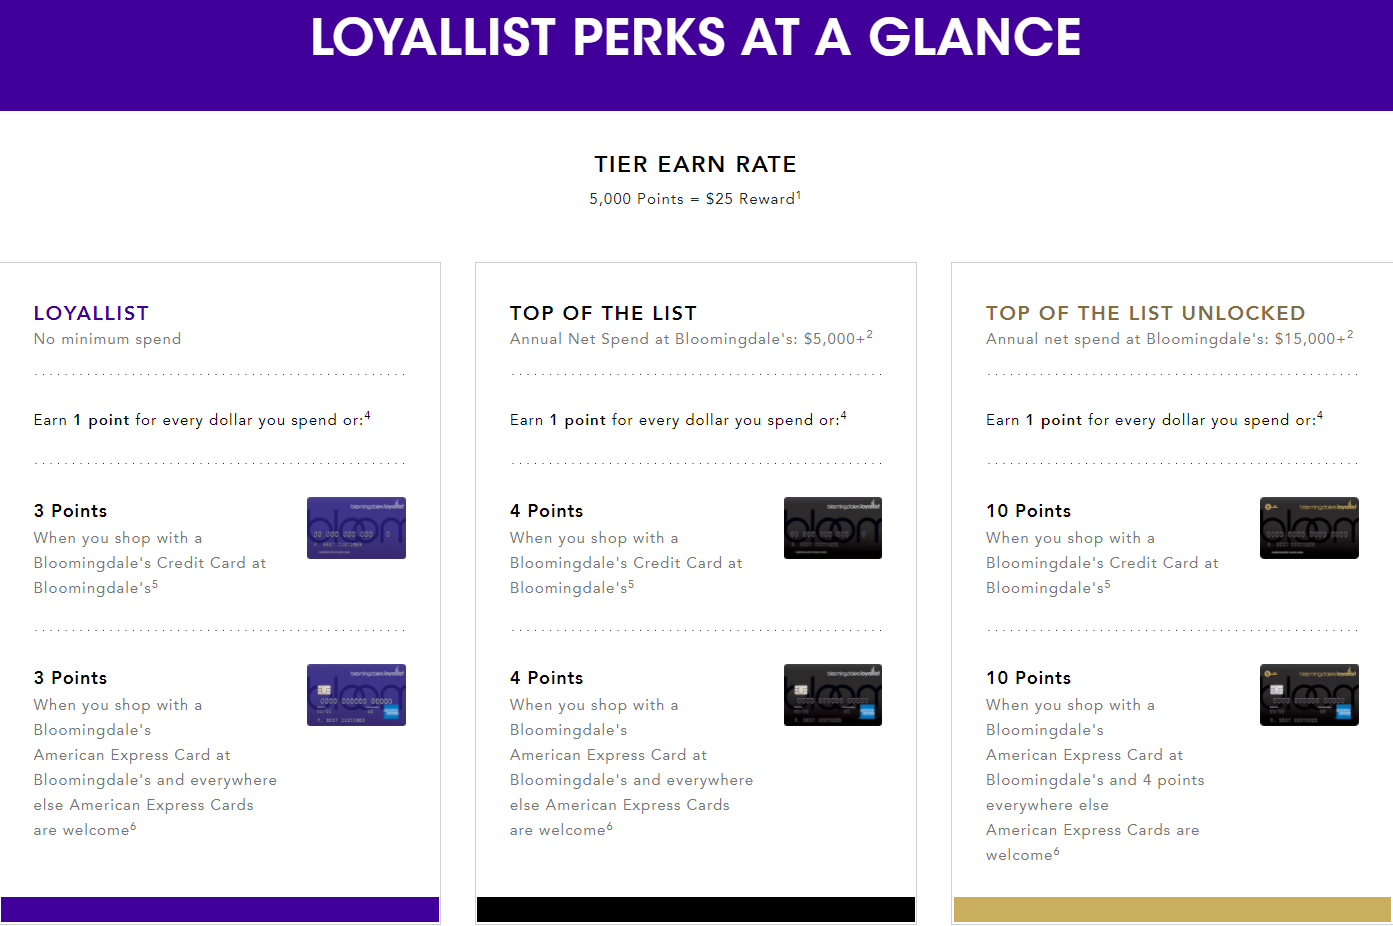 The loyalty program page for Bloomingdale’s